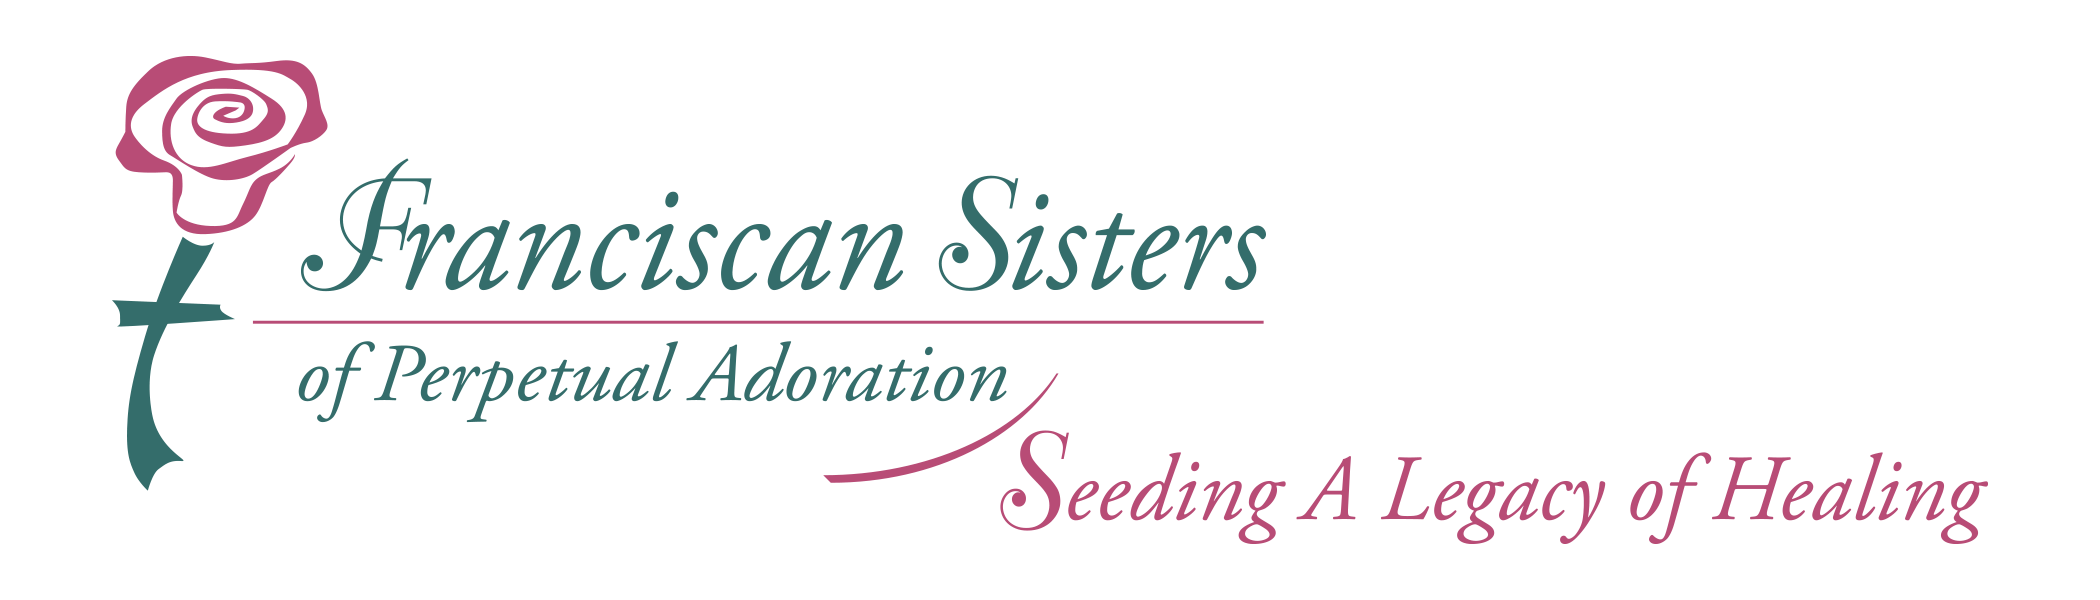 pink-rose-green-stem-text-franciscan-sisters-of-perpetual-adoration-seeding-a-legacy-of-healing